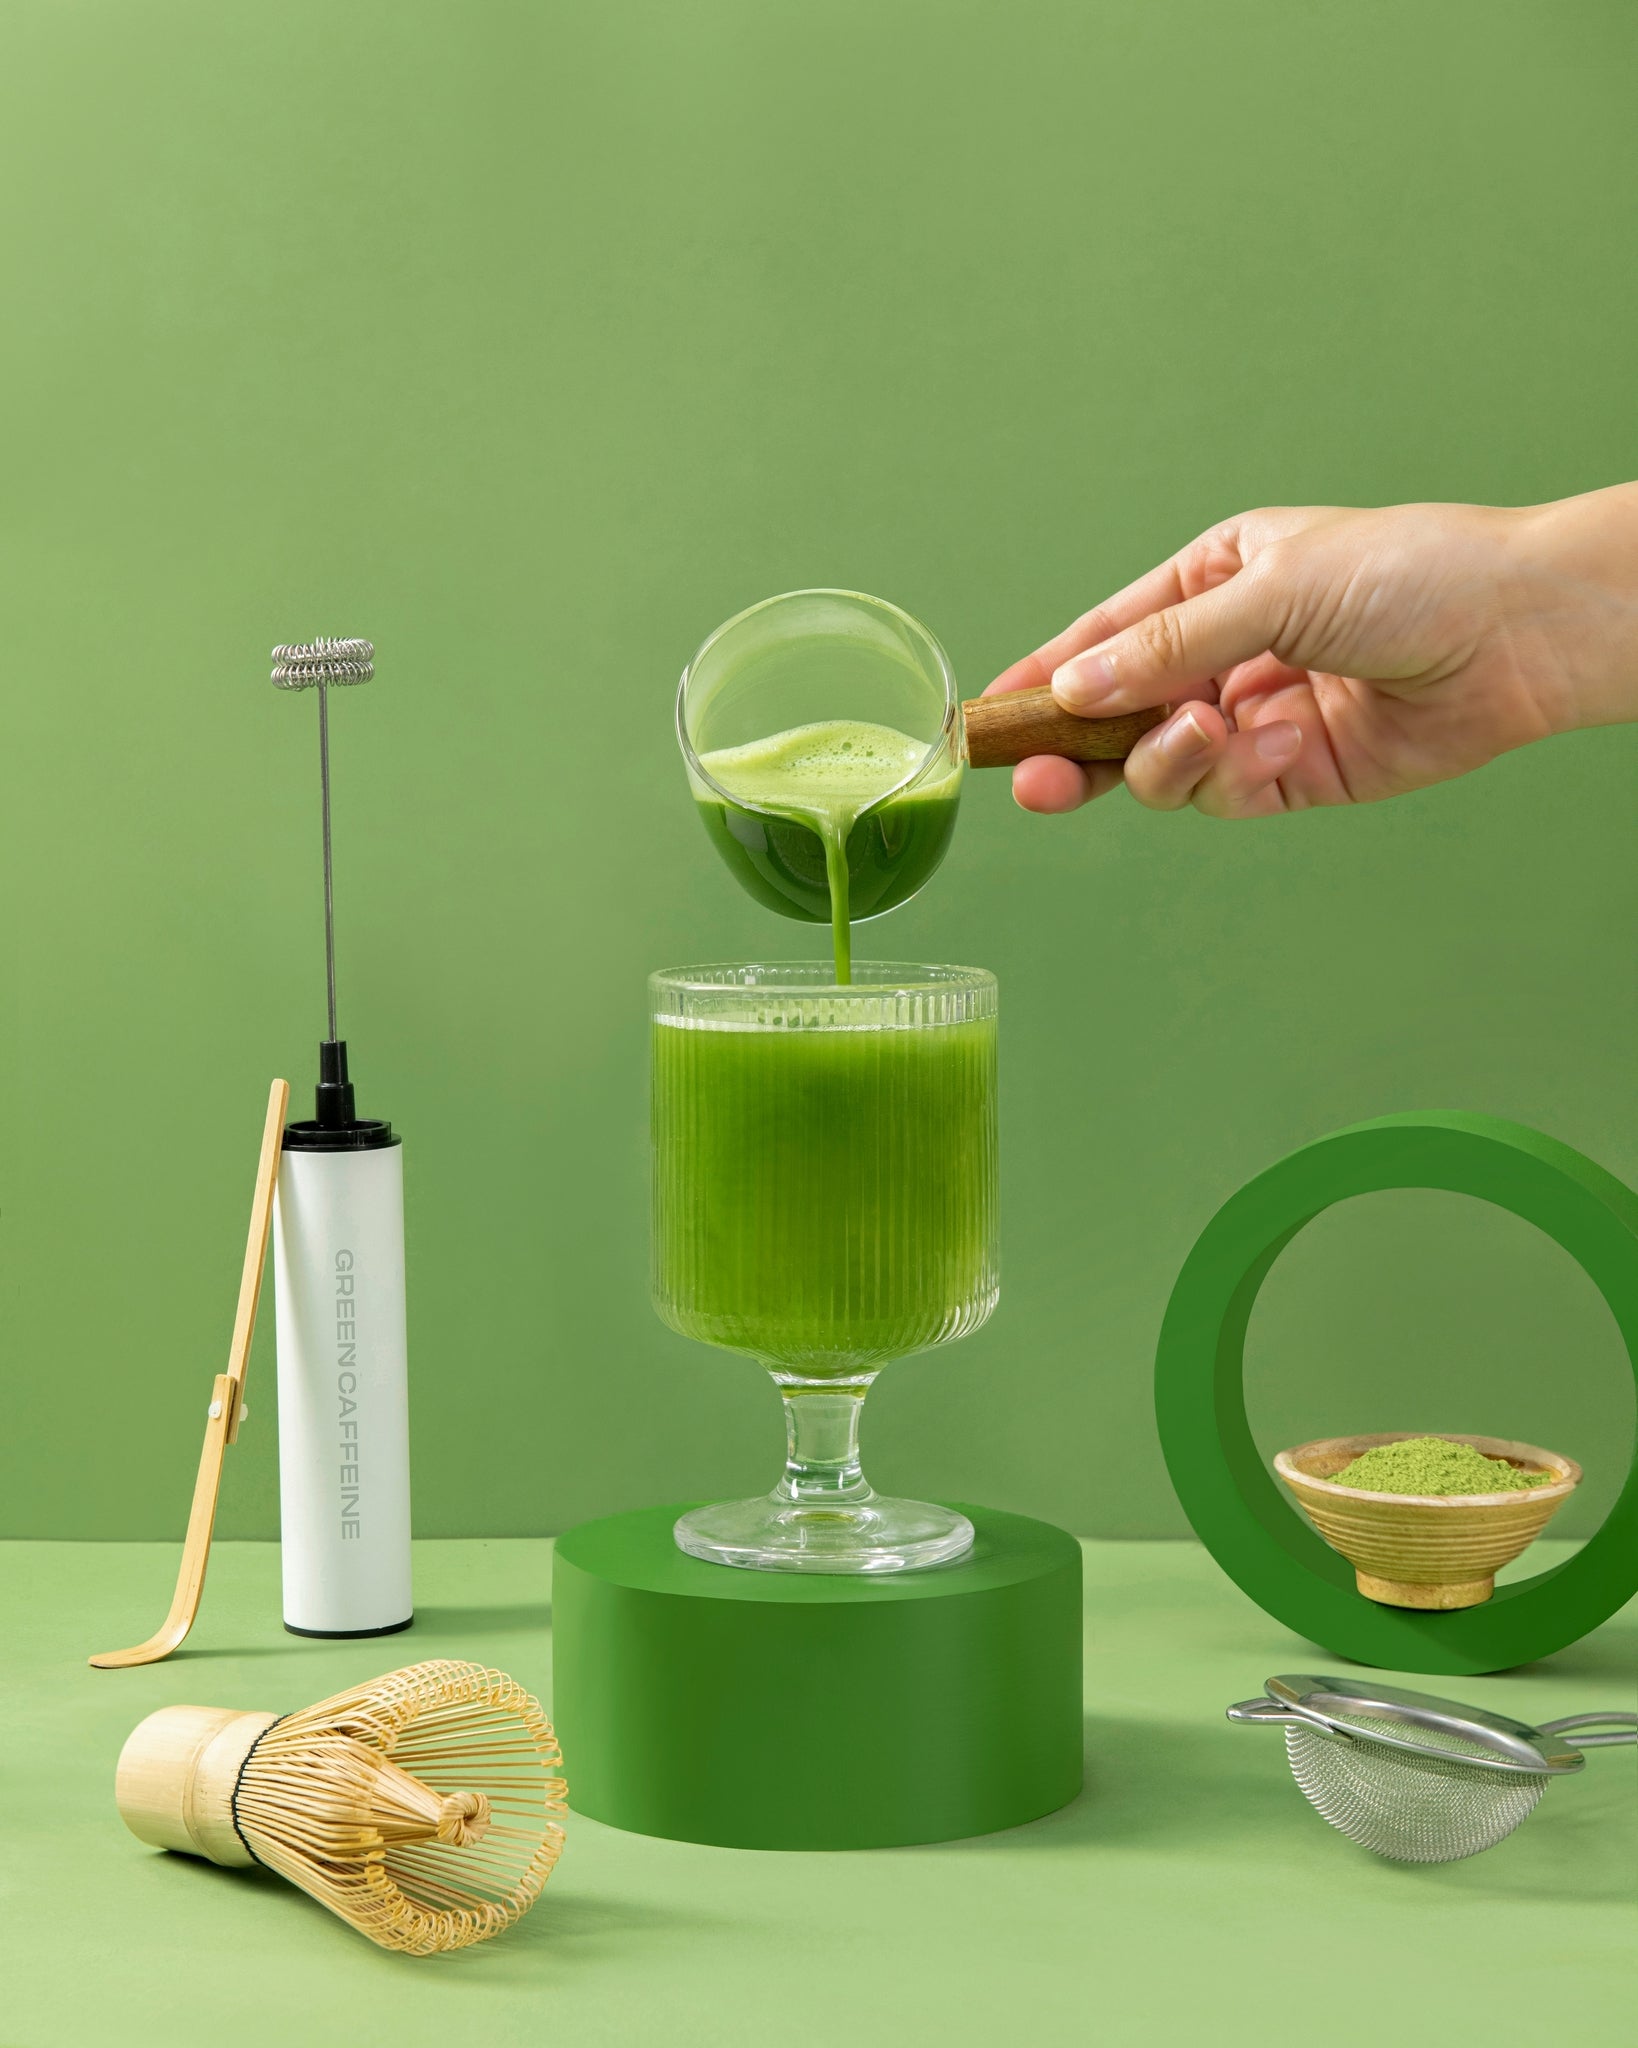 USB Rechargeable Matcha Frother - Portable Matcha Whisk - Green Caffeine